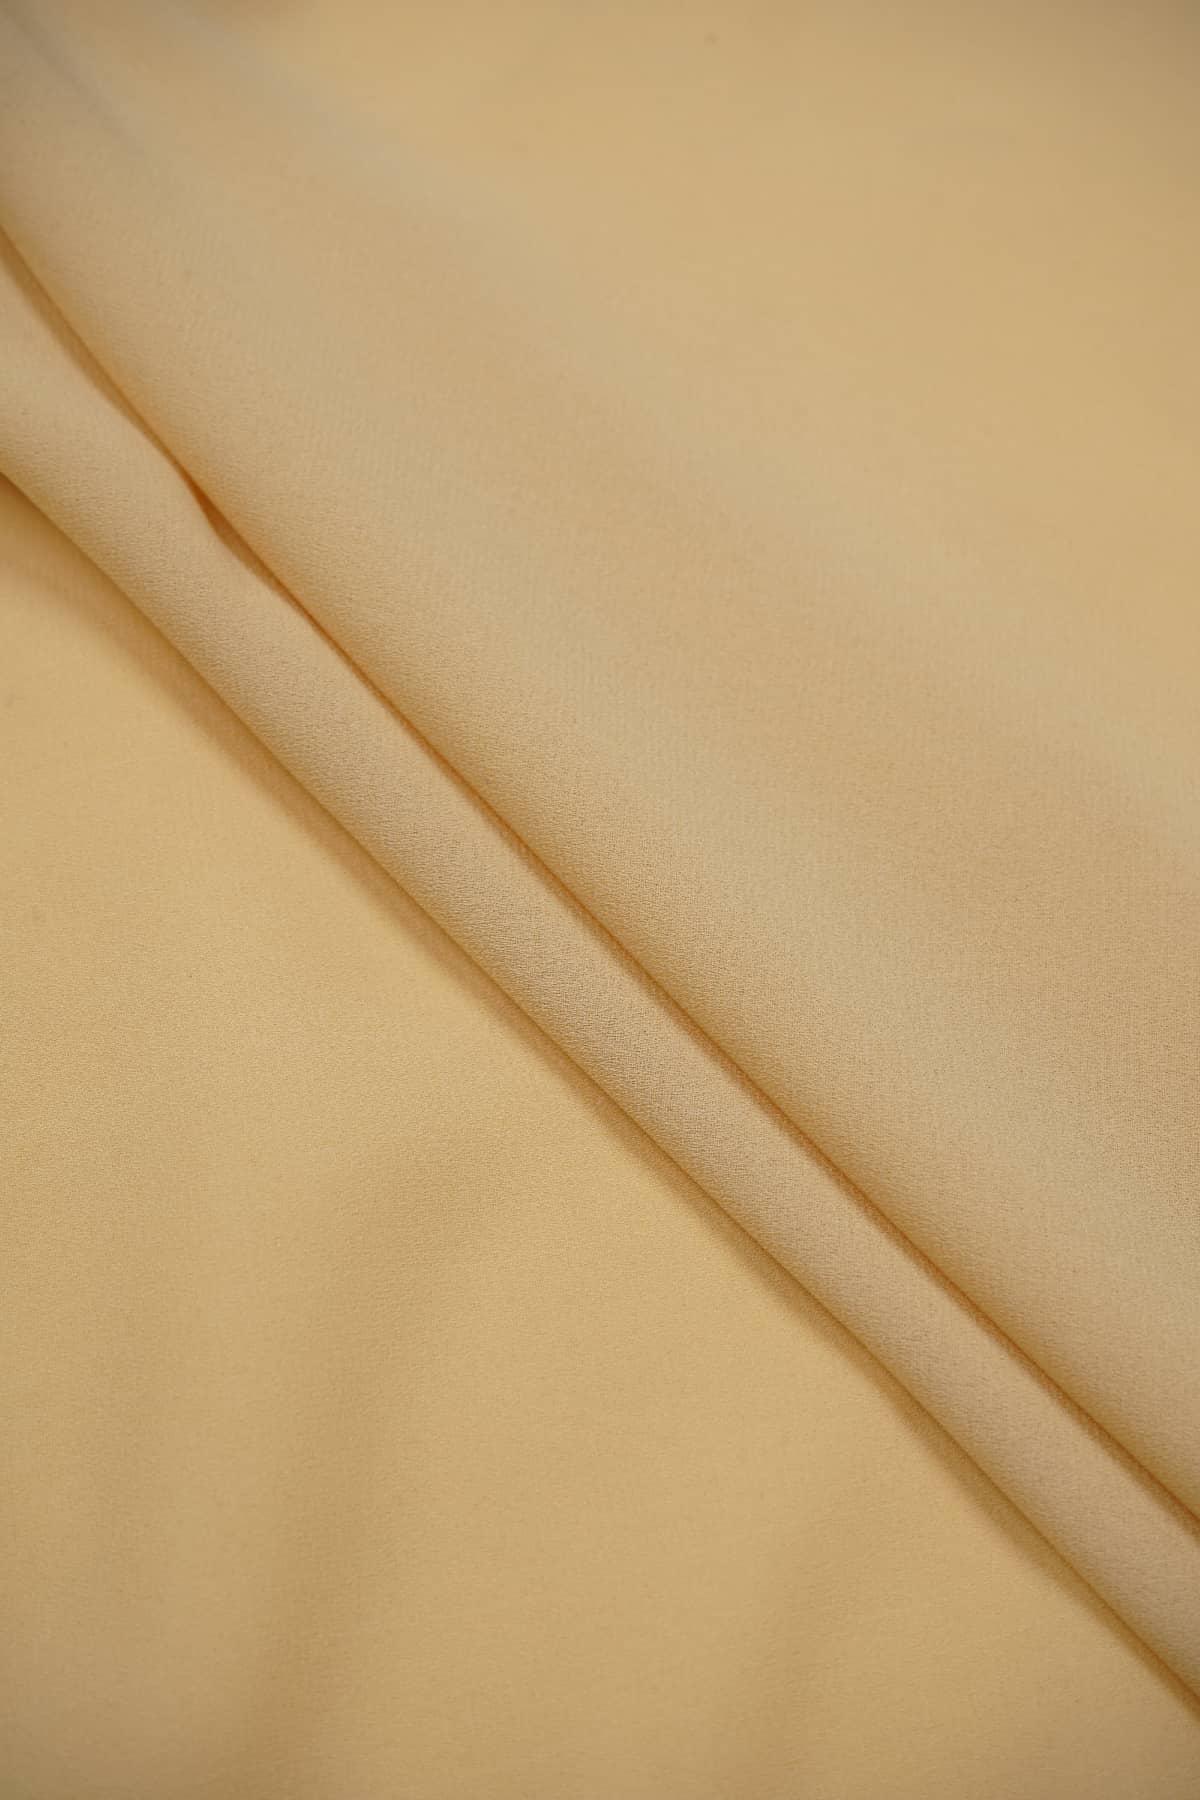 Plain Dyed Sash - saraaha.com - Casual, Casual Wear, Color Variety, Comfy Casual, comfy casuals, Formal Wear, Heavy Weight, Indo Western, Kurta, Long Dresses, Men Wear, Men's wear collection, One Pieces, Plain Dyed, Polyester, Shirt, Suits, Western Dresses, Women Wear